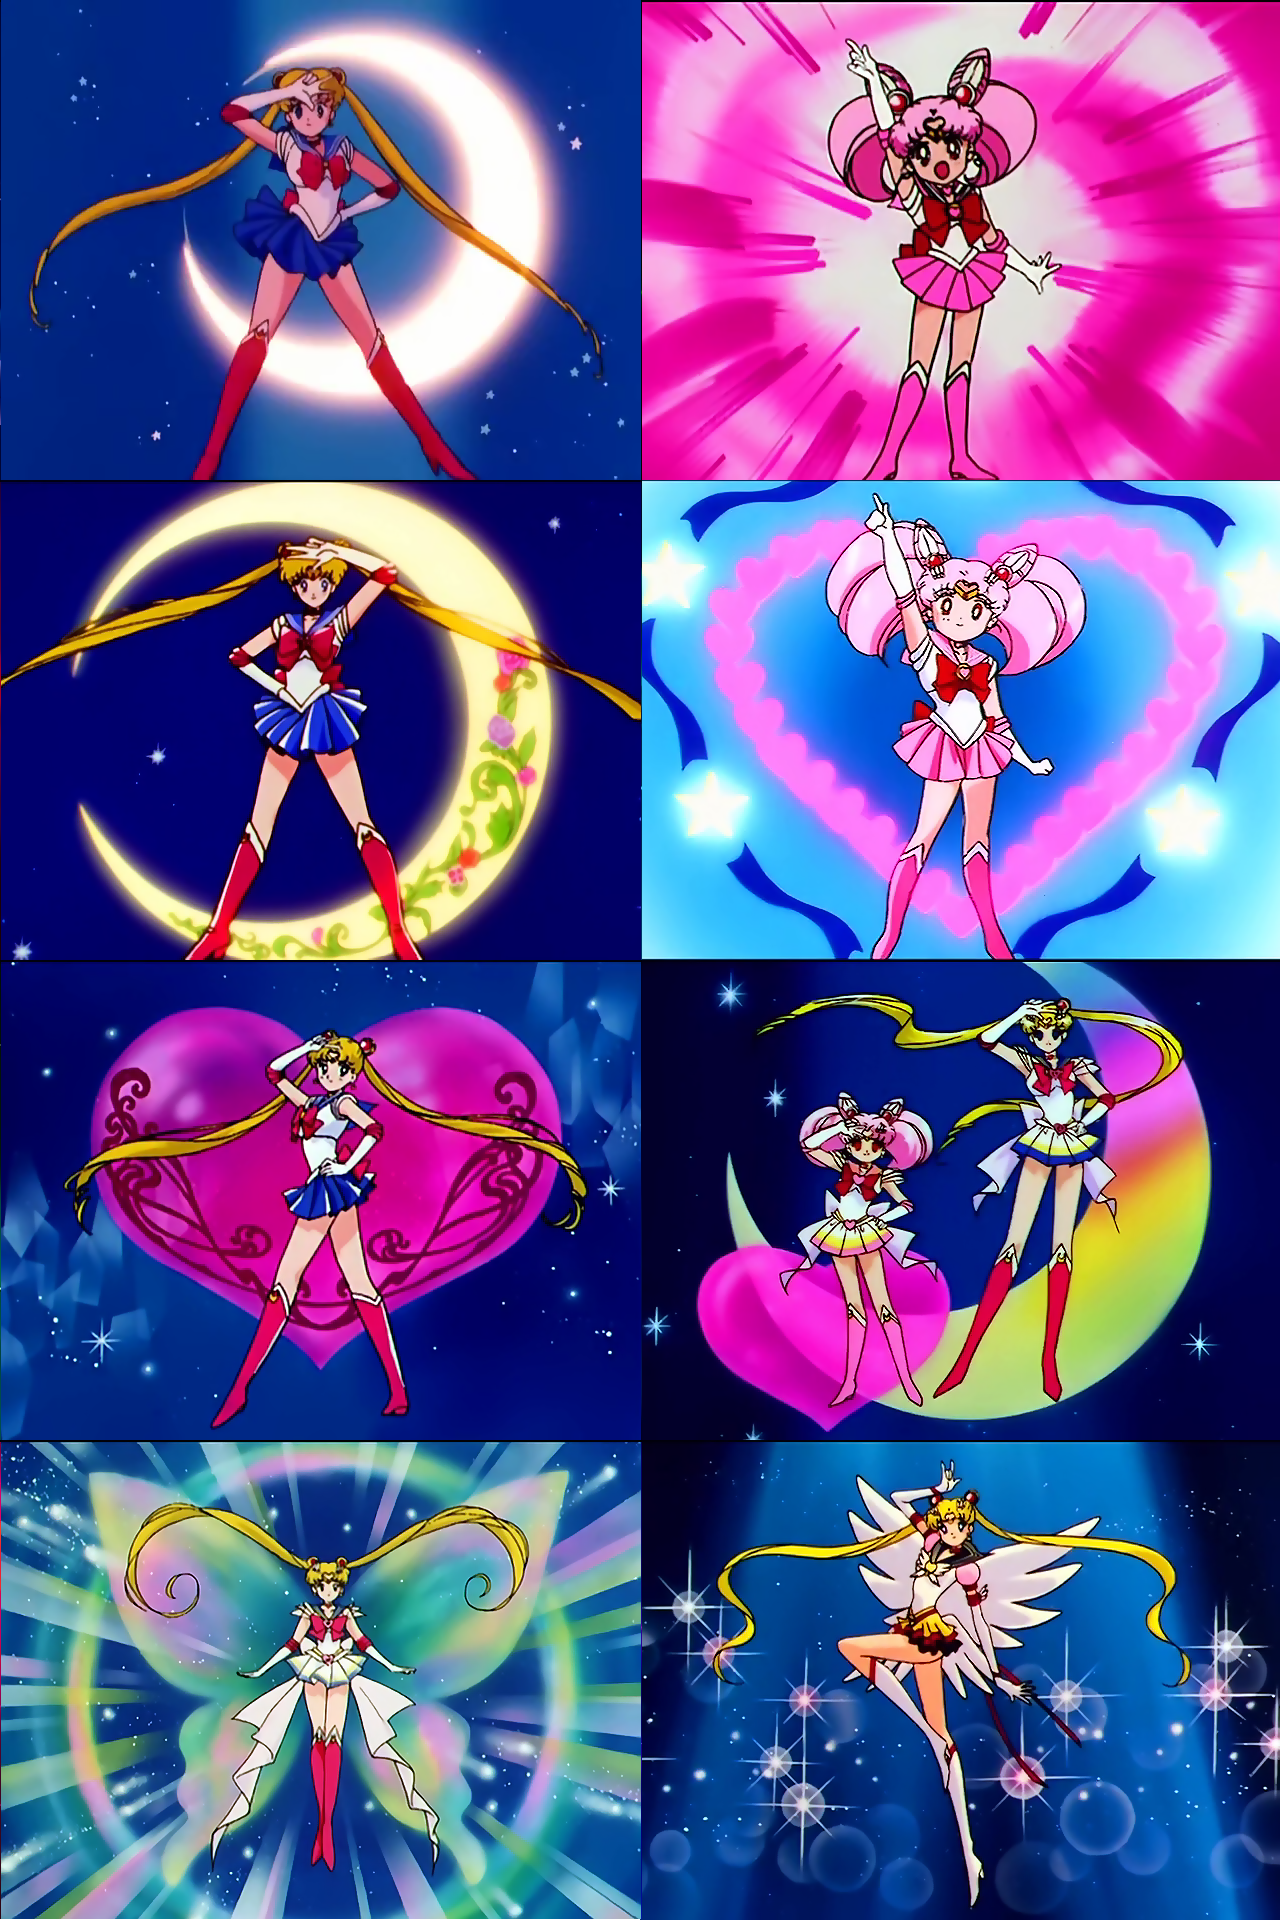 Best Sailor Moon Transformation Sequences, Ranked